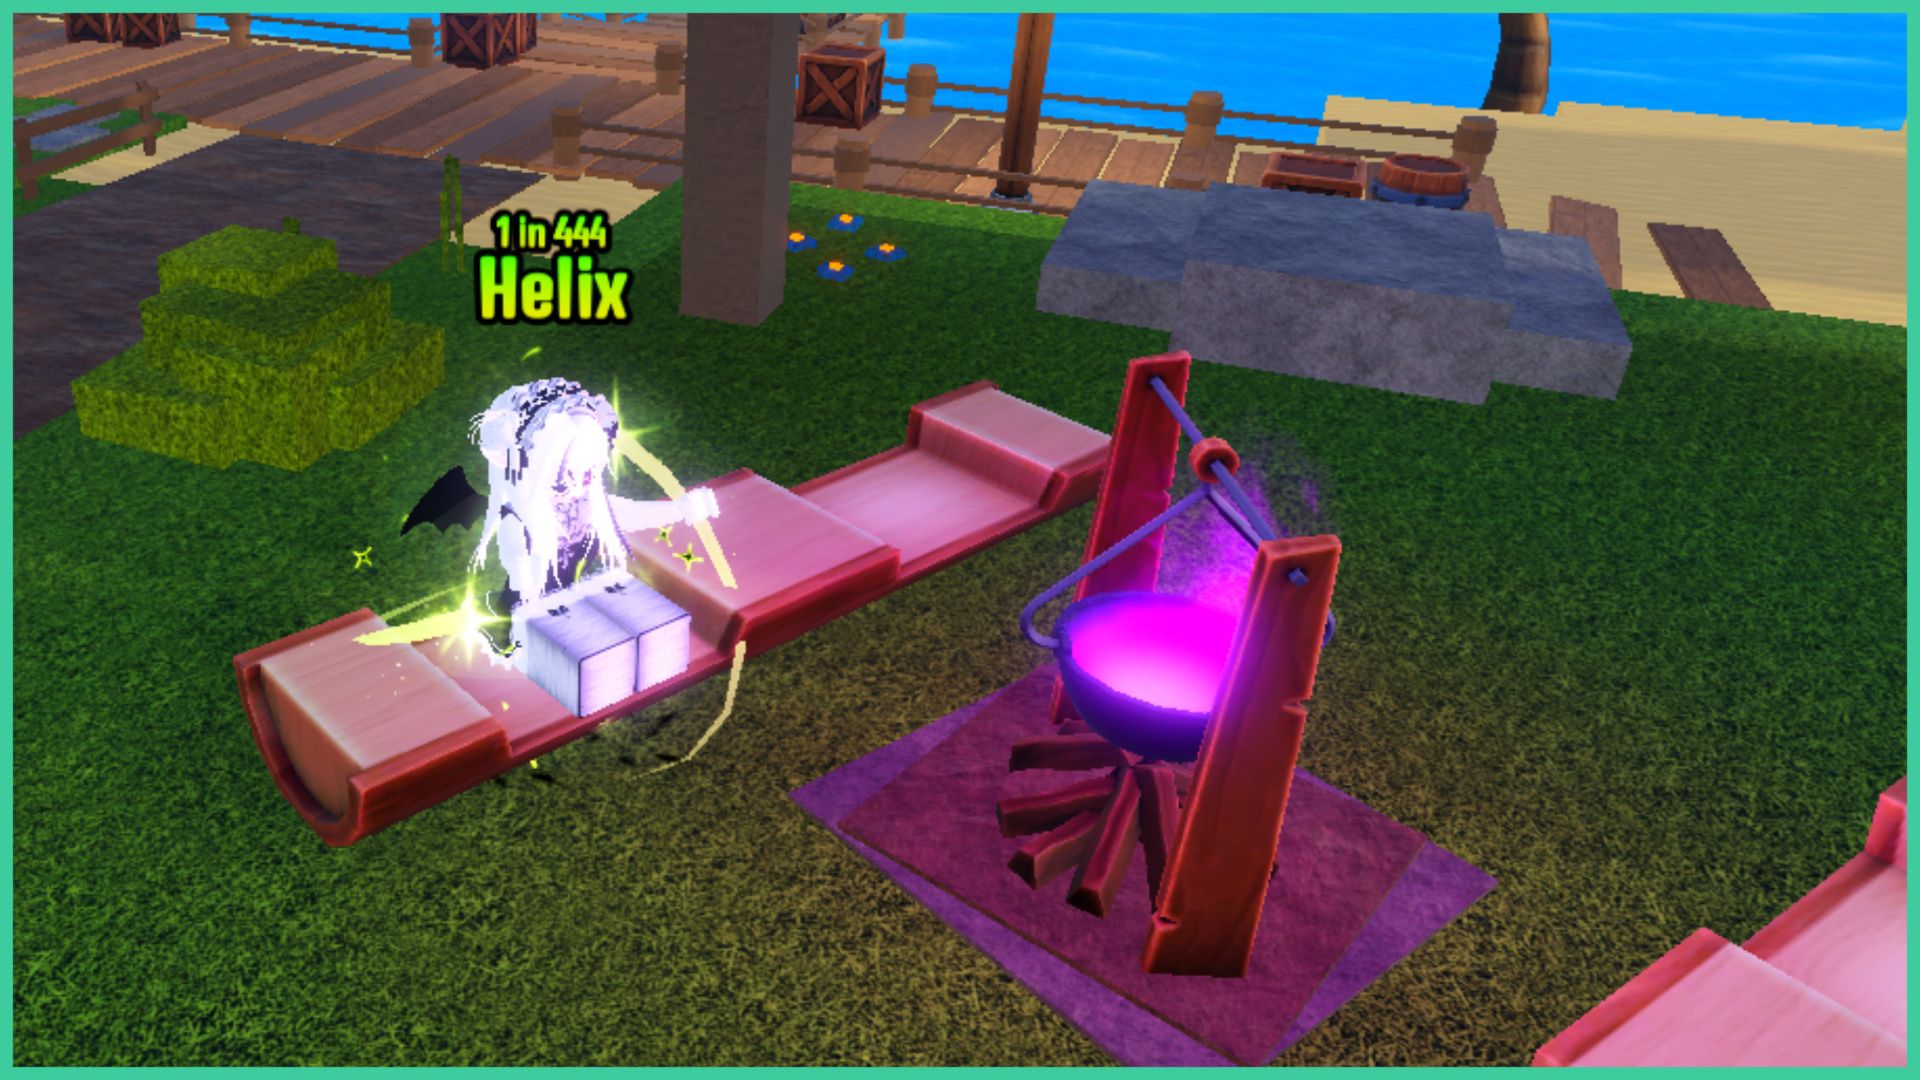 feature image for our aura rng codes guide, there is a roblox player with a glowing green aura with stars equipped as they sit on a bench in front of a small cauldron filled with blowing purple smoke, there is a wooden deck close by that leads to the sea